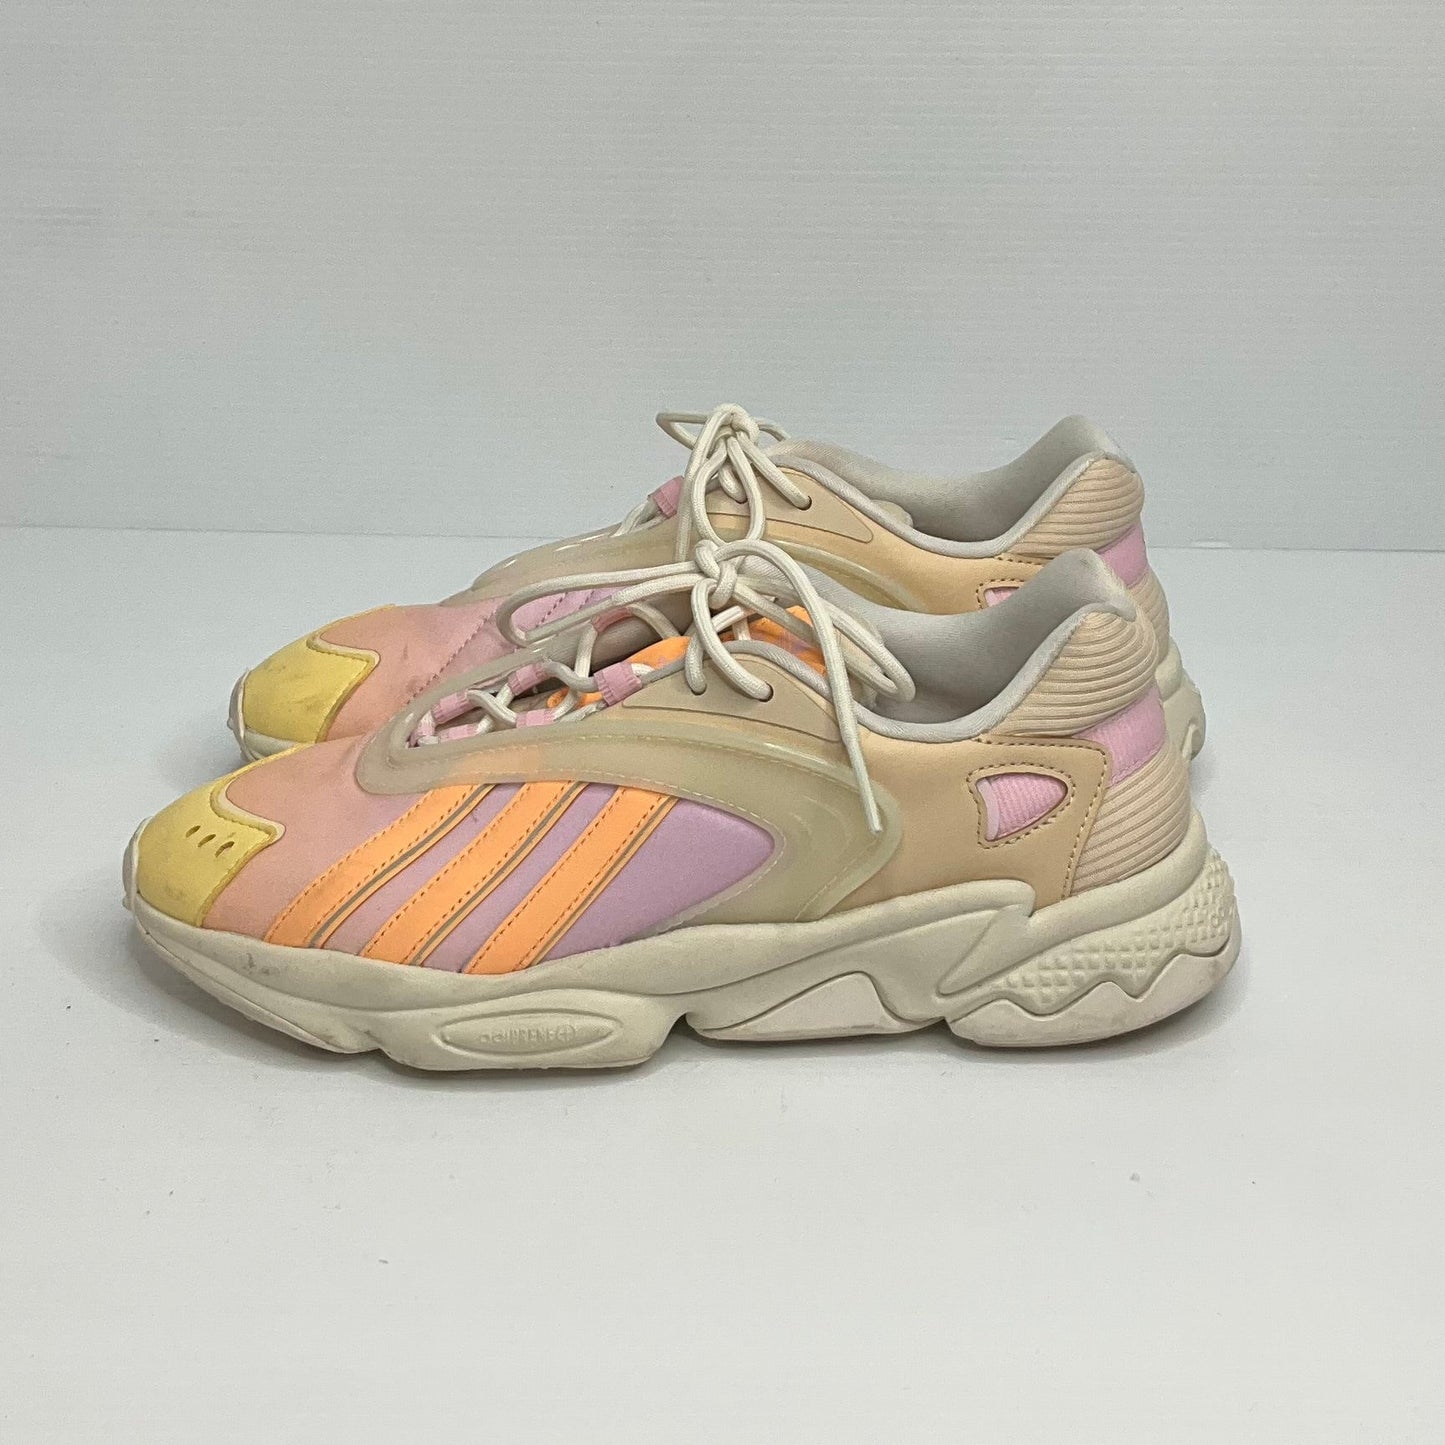 Pink & Purple Shoes Athletic Adidas, Size 9